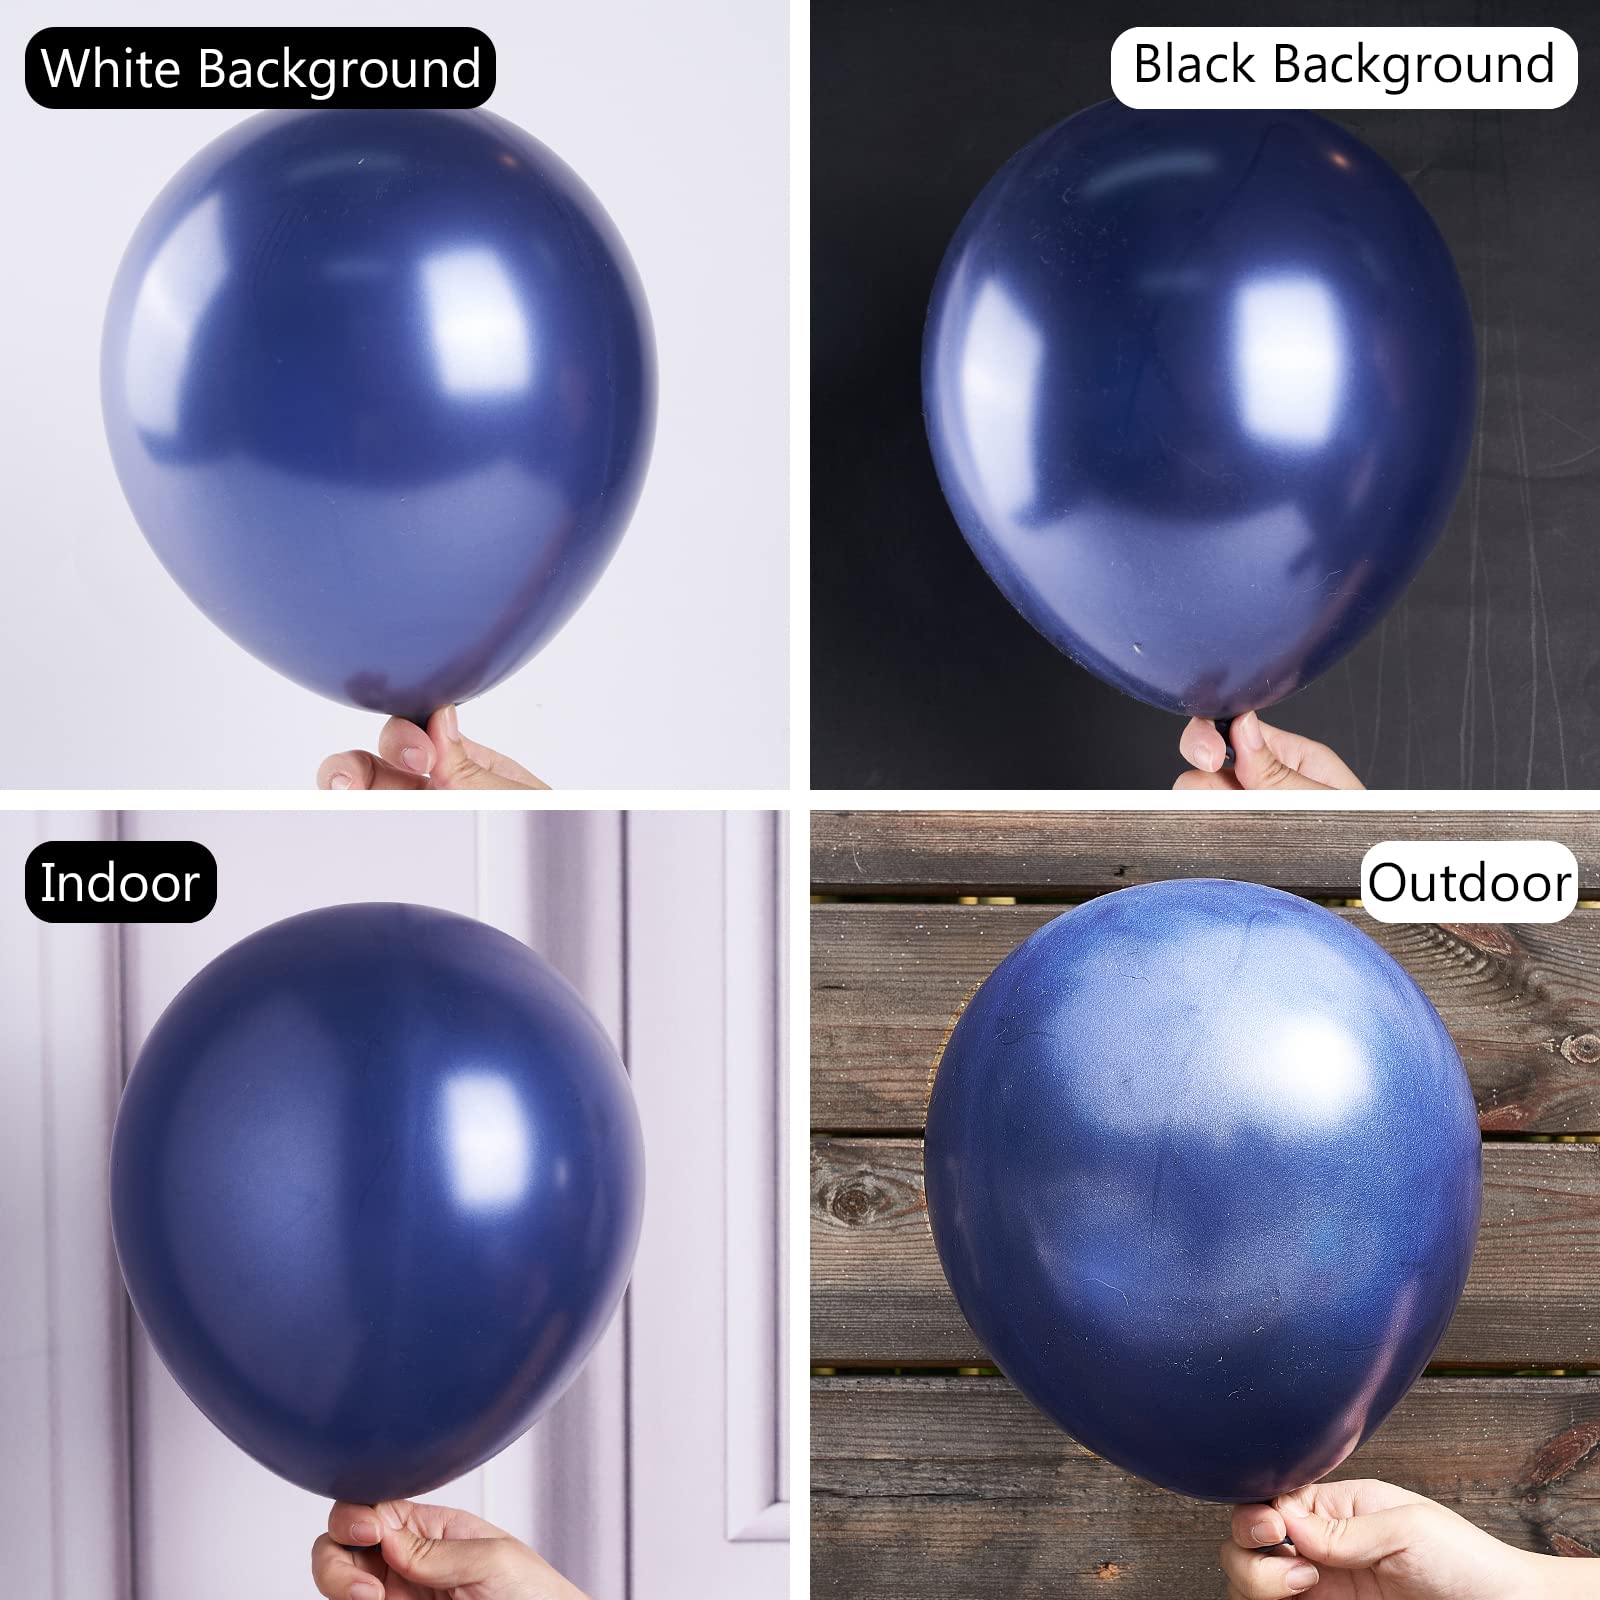 PartyWoo Navy Blue Balloons, 140 pcs Pearl Navy Blue Balloons Different Sizes Pack of 18 Inch 12 Inch 10 Inch 5 Inch Navy Balloons for Balloon Garland or Balloon Arch as Party Decorations, Blue-Z90